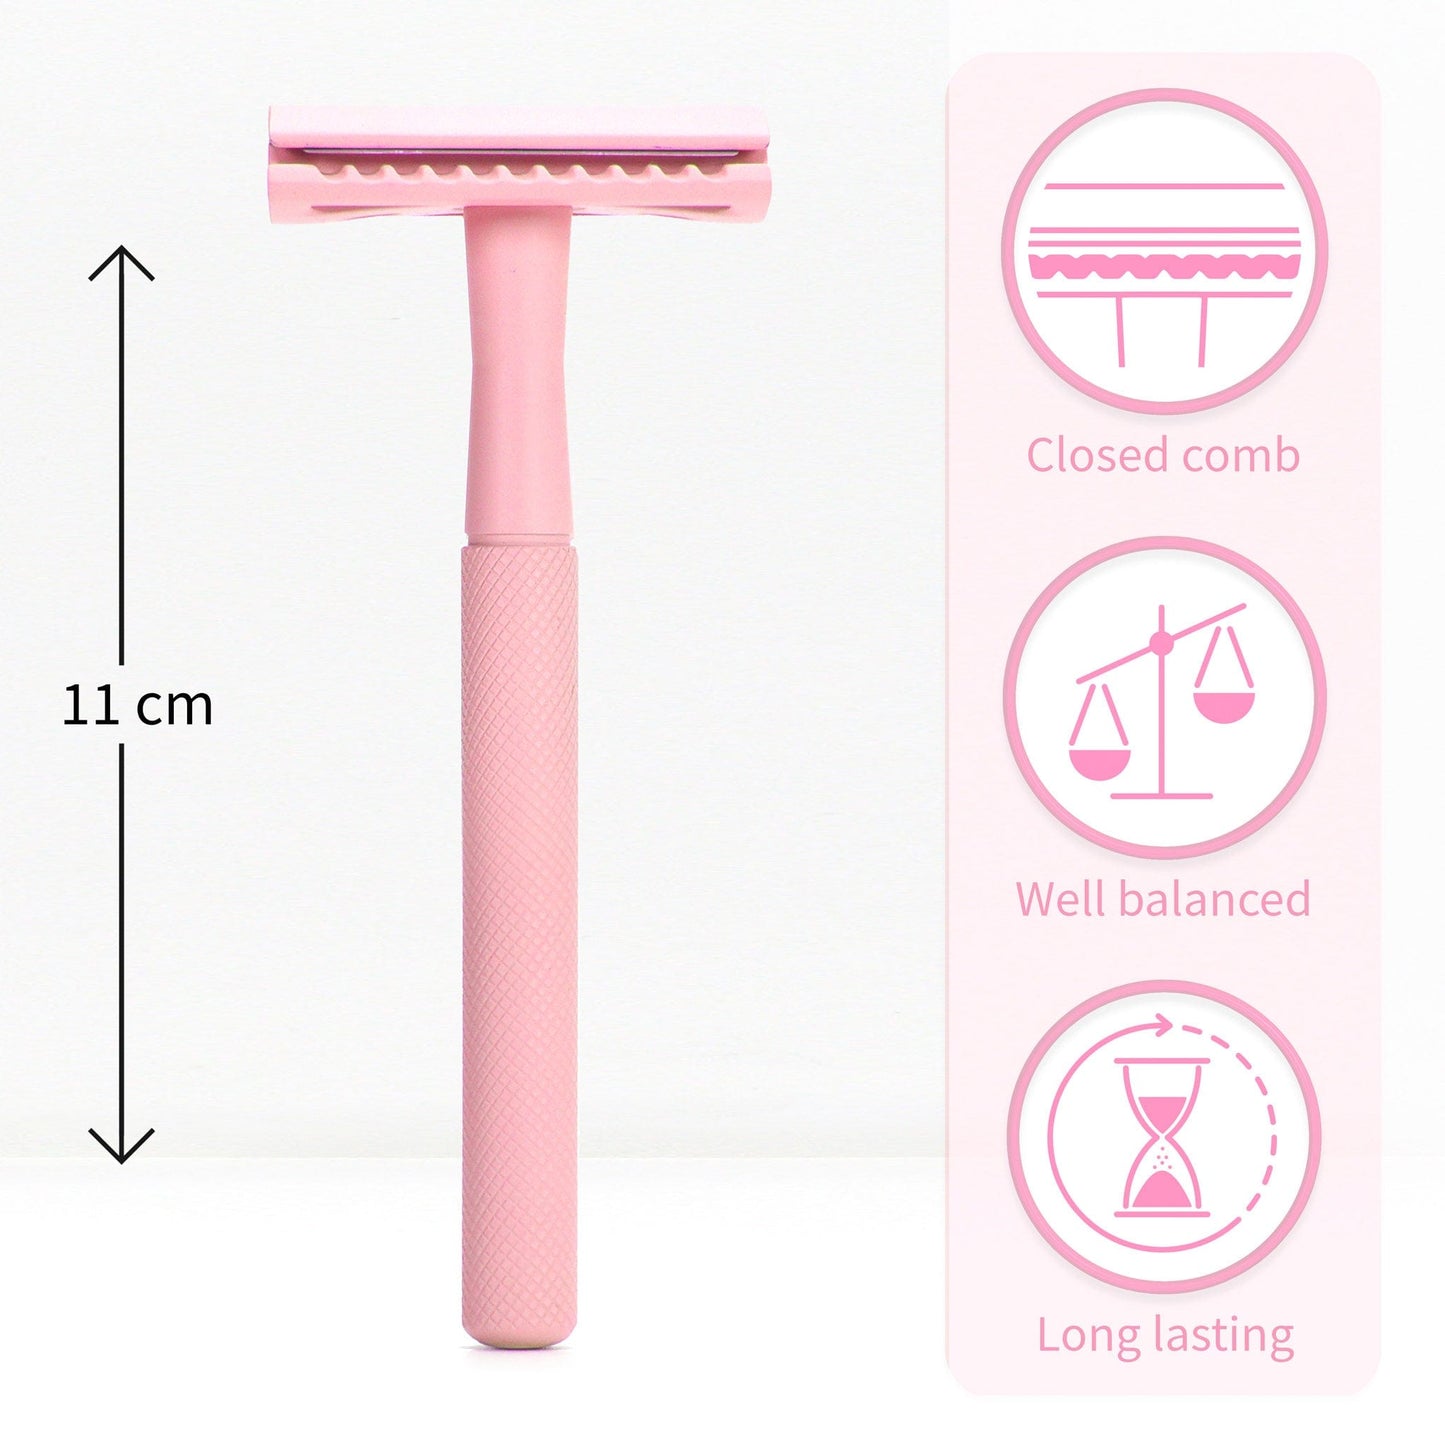 Bambaw Shaving Accessories Pink Bambaw Stainless Steel Safety Razor